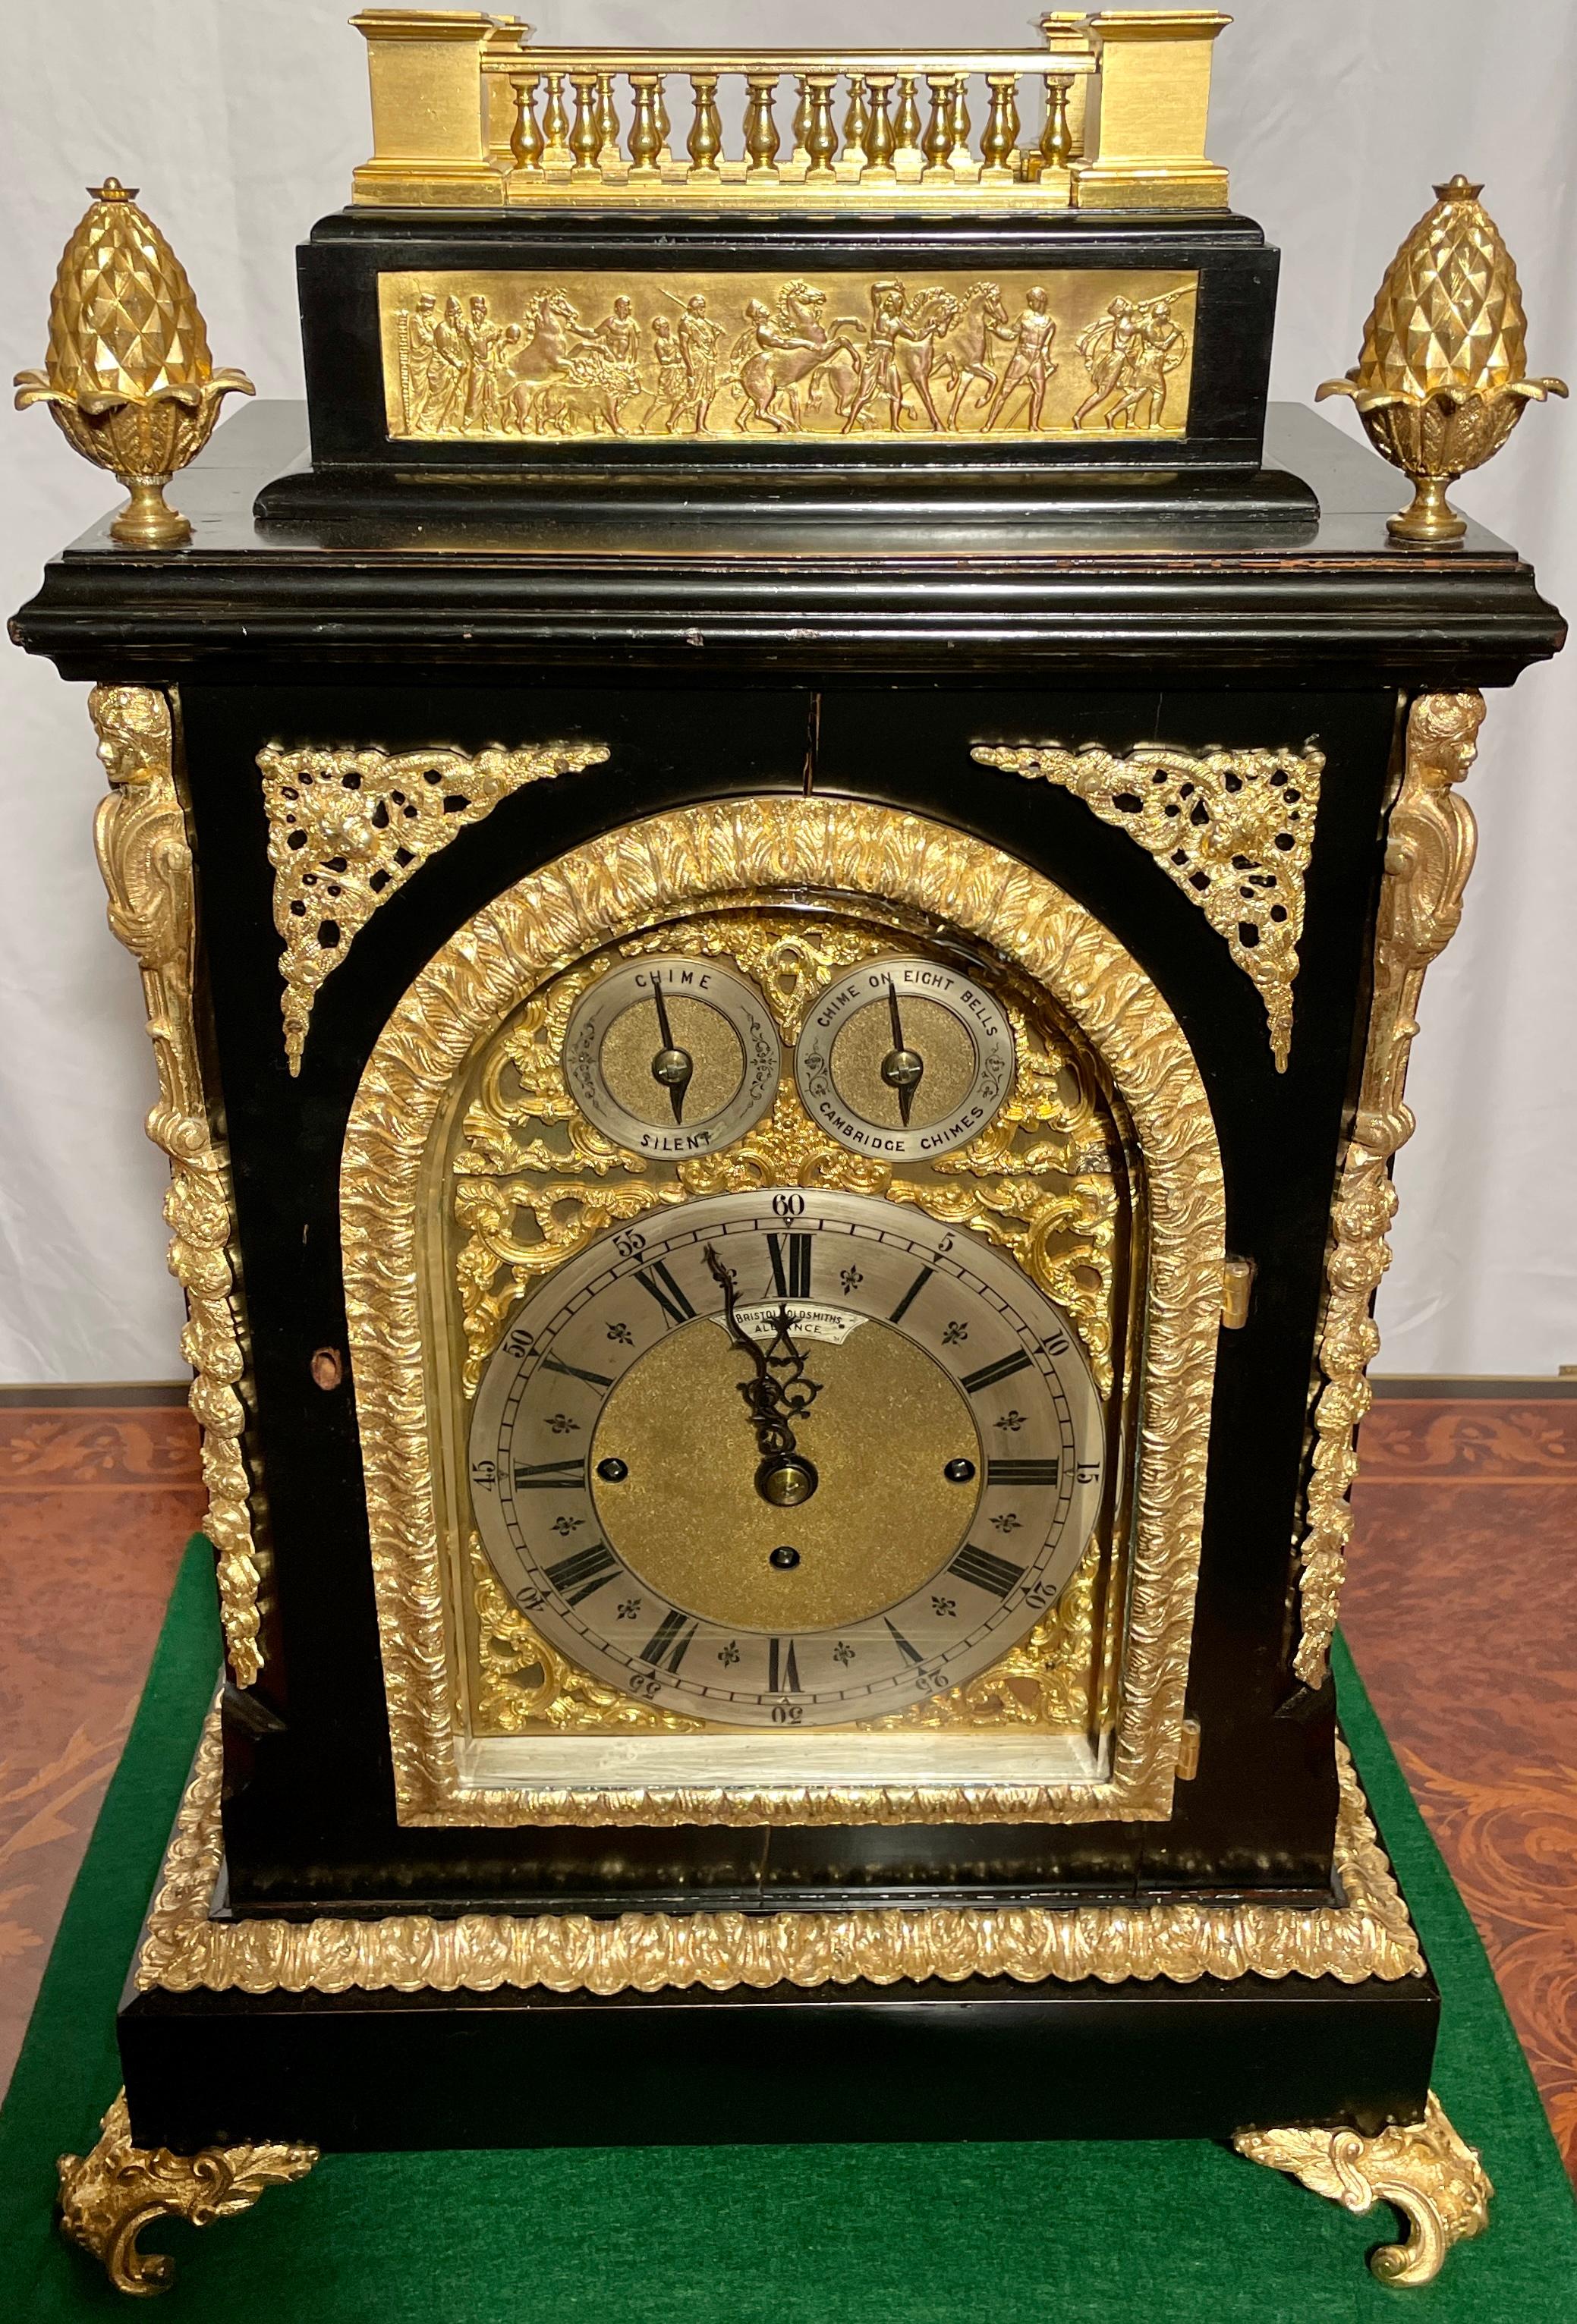 Magnificent antique English gold bronze and ebonized wood bracket clock with triple fusee chiming on eight bells, circa 1880.